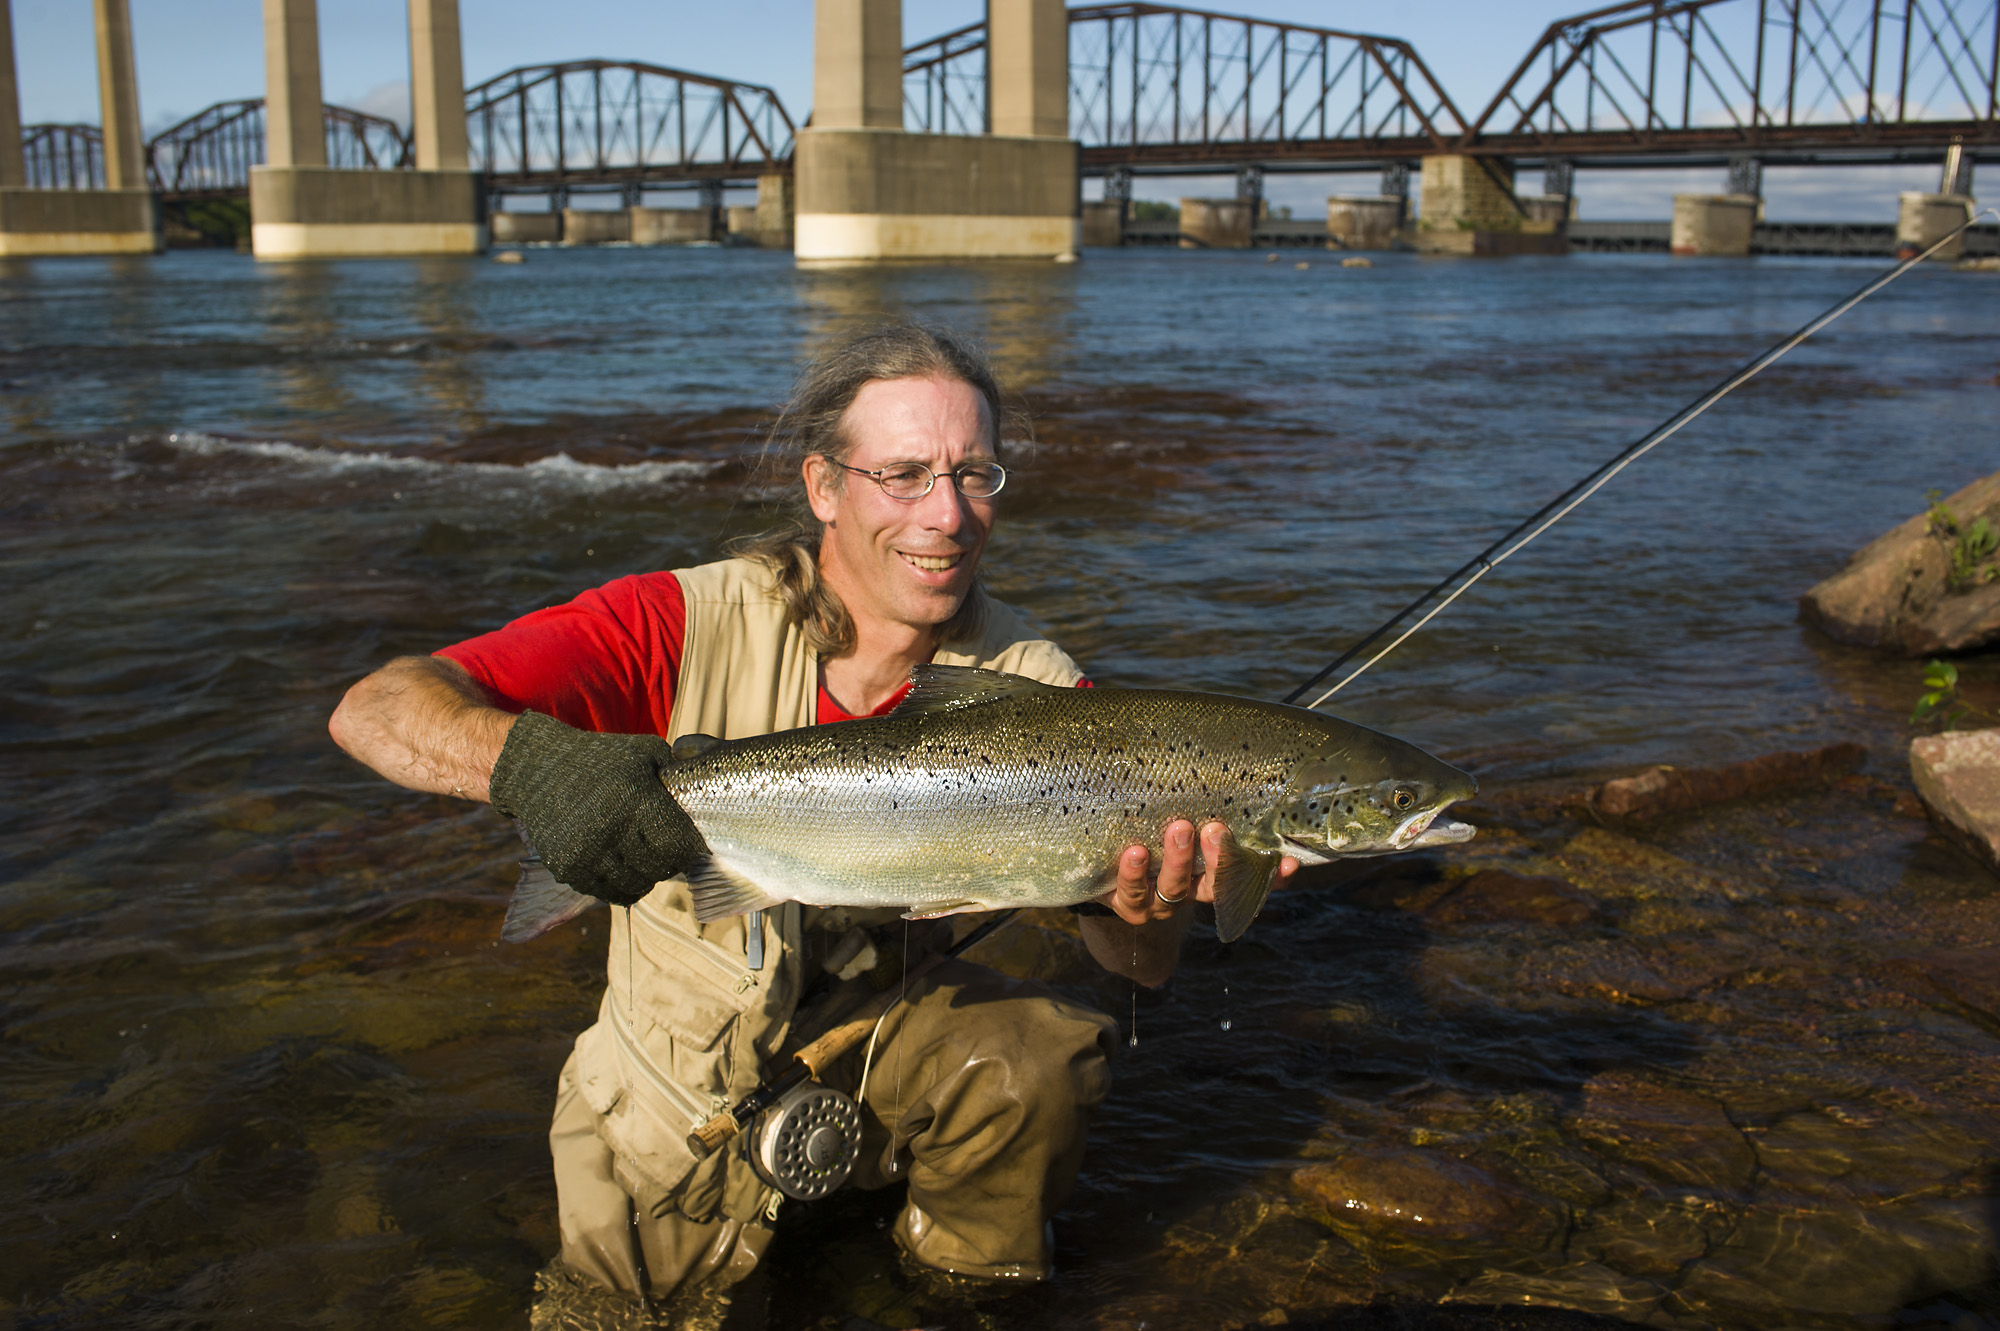 A smiling man holds up a large Atlantic salmon as he climbs out of the wide St. Mary's River with a fishing rod. Two bridges and clear blue sky are in the background. 